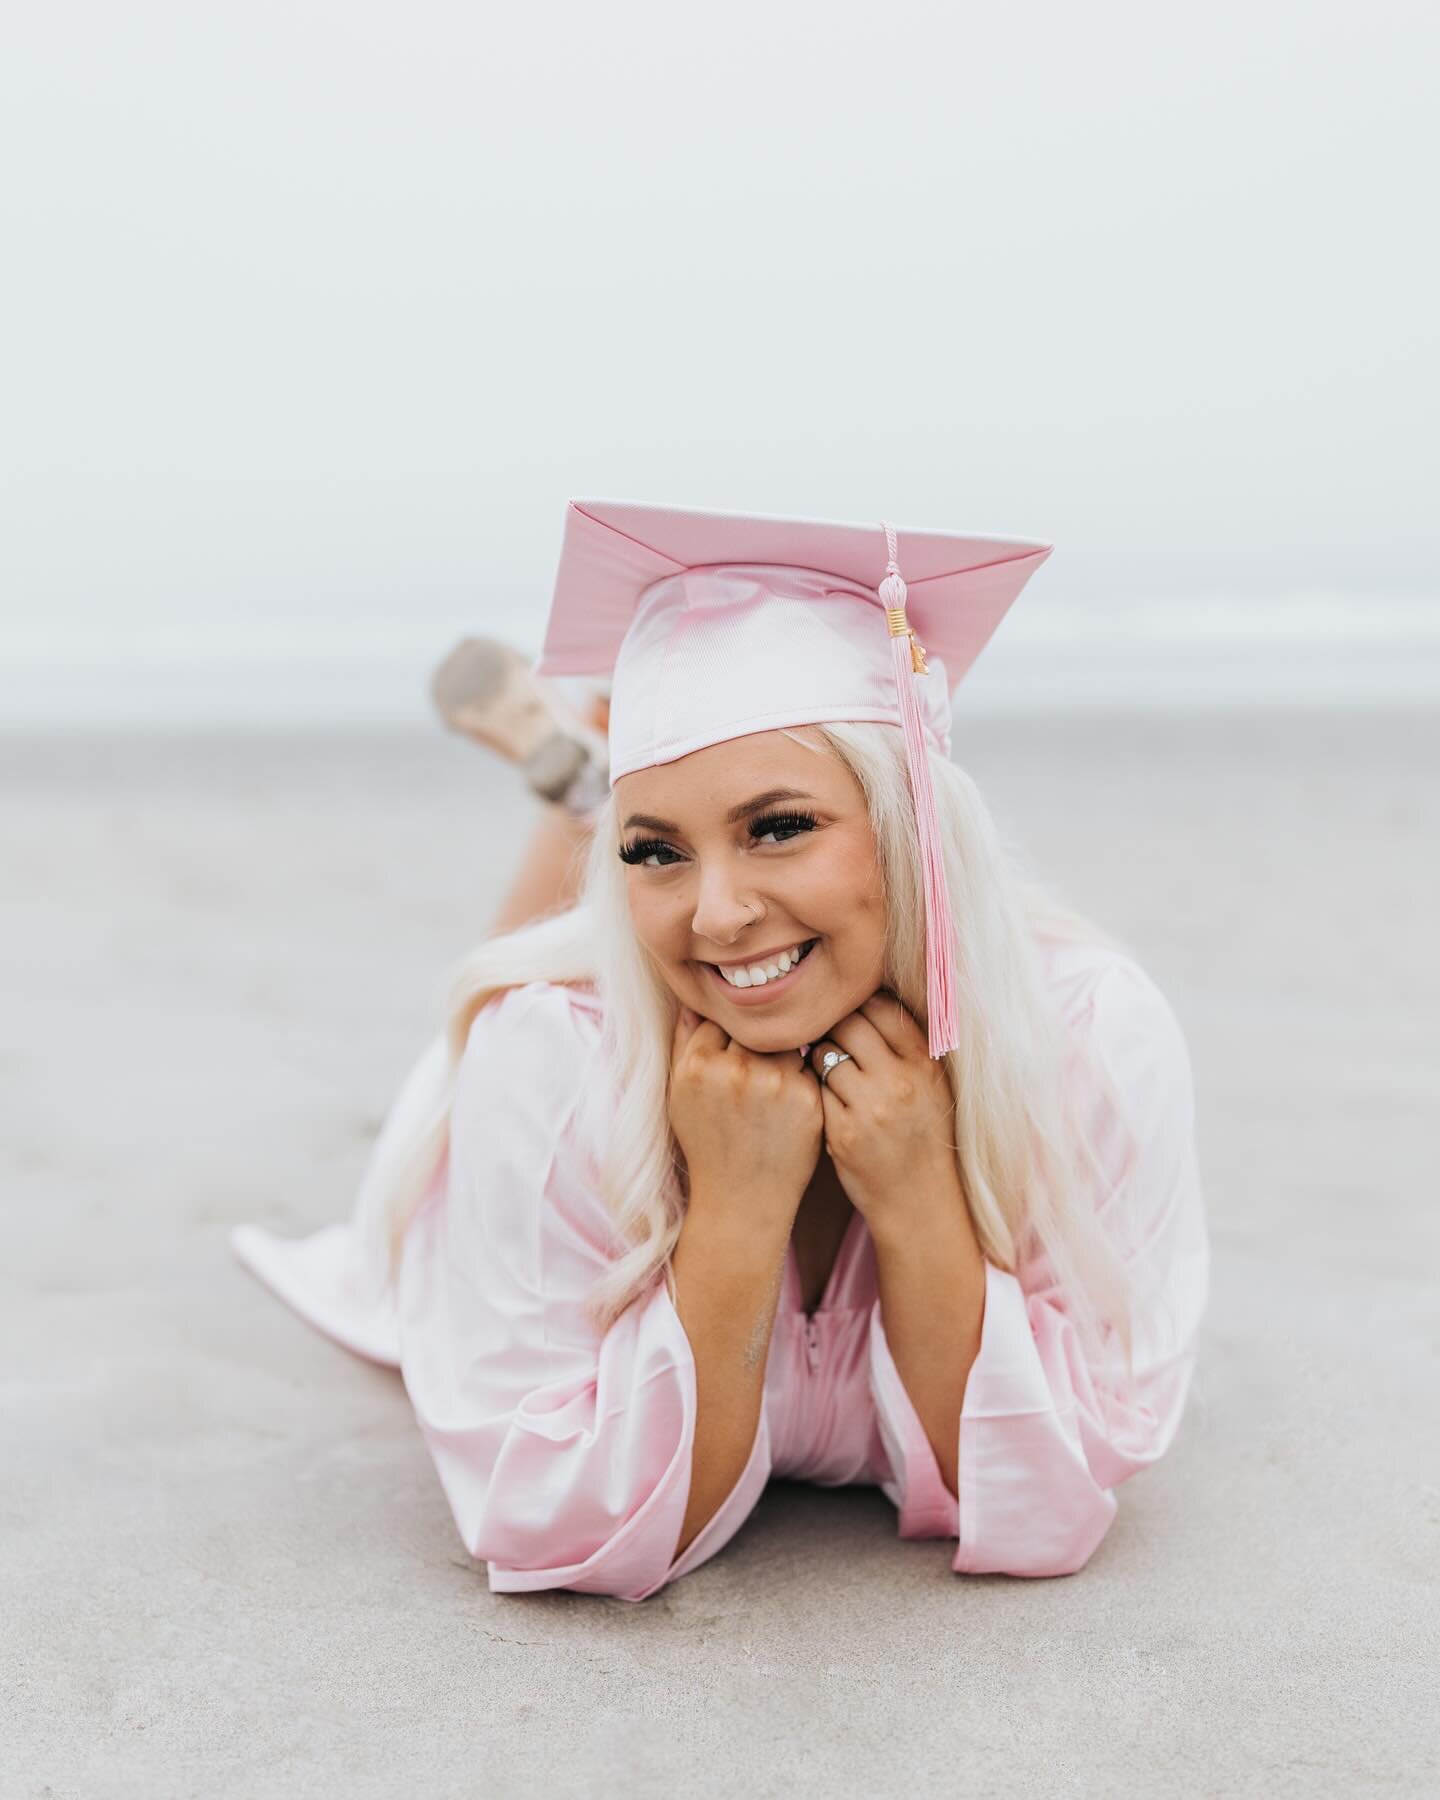 let&rsquo;s talk about how to personalize your grad session! 🎓🥳💖⬇️

grad photos are all about YOU, so it can be fun to find ways to let your personality shine in your photos. whether that&rsquo;s bringing a prop that represents a favorite hobby, t